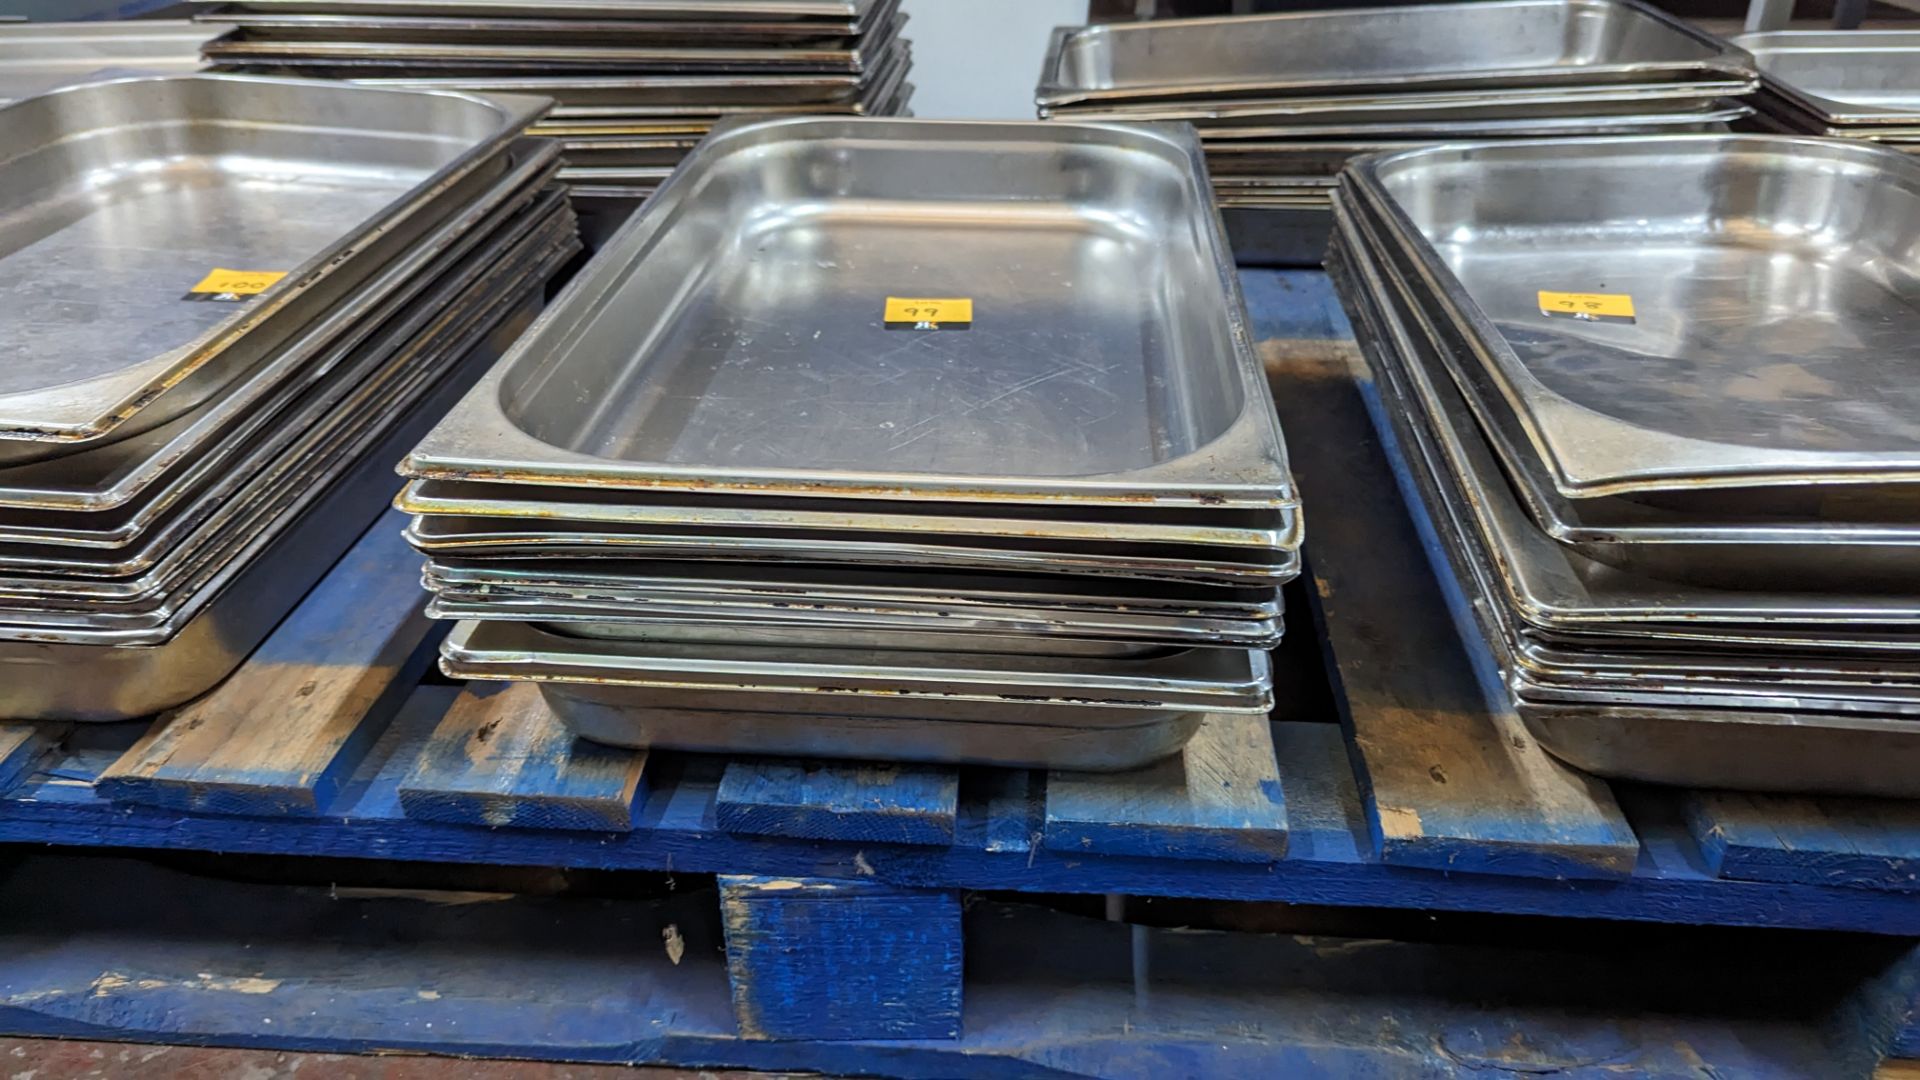 10 off stainless steel trays each measuring 530mm x 330mm x 70mm - Image 2 of 3